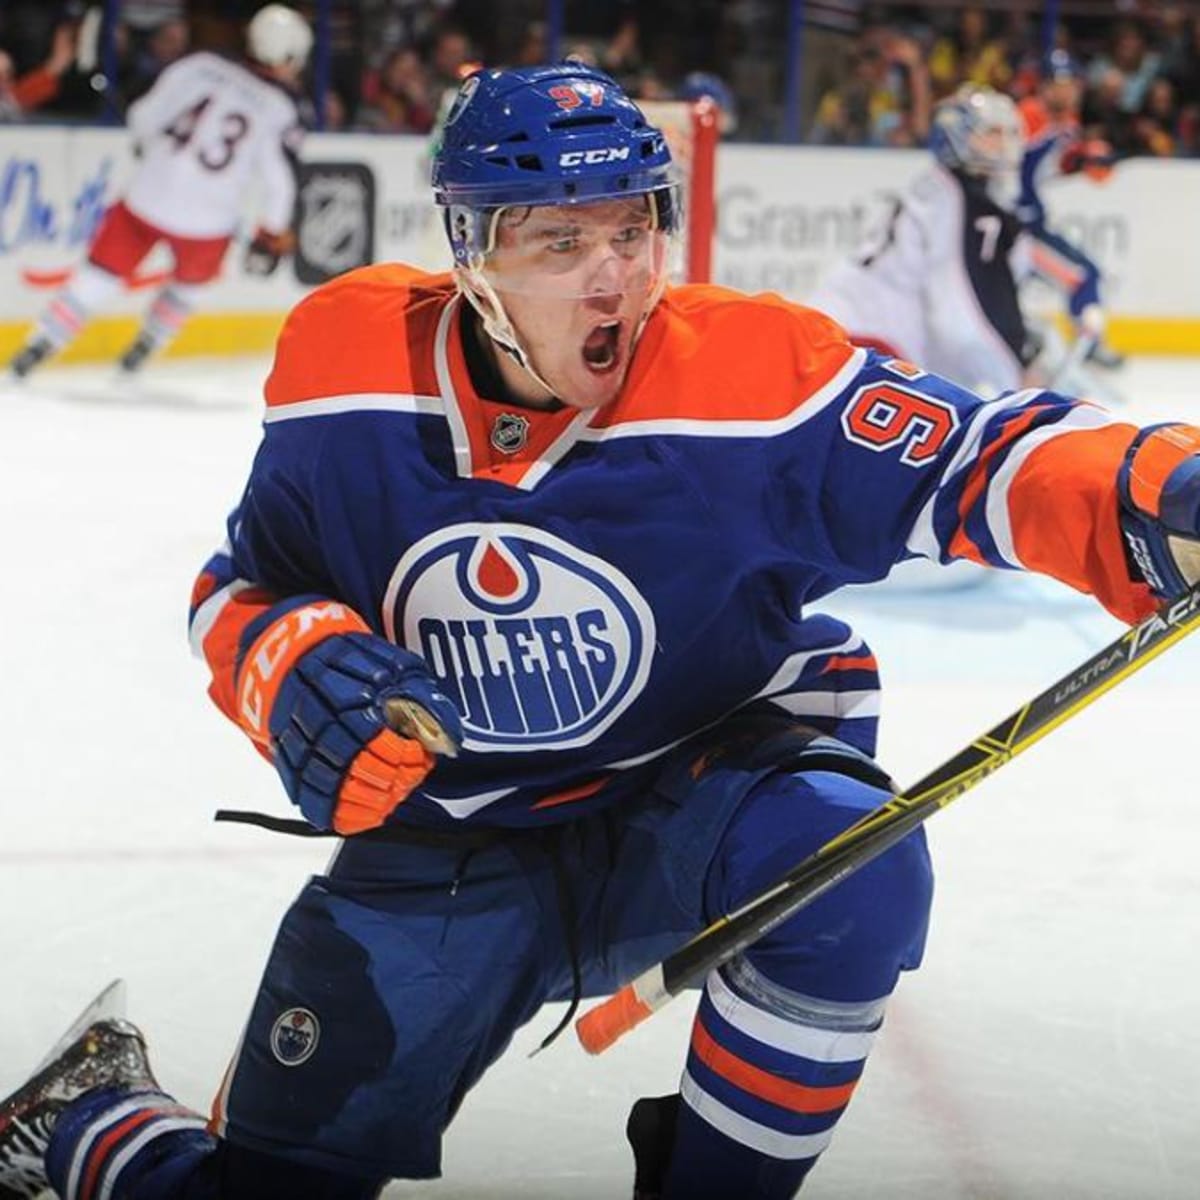 Will Edmonton Oilers squander Connor McDavid's best years? Depends how you  slice it